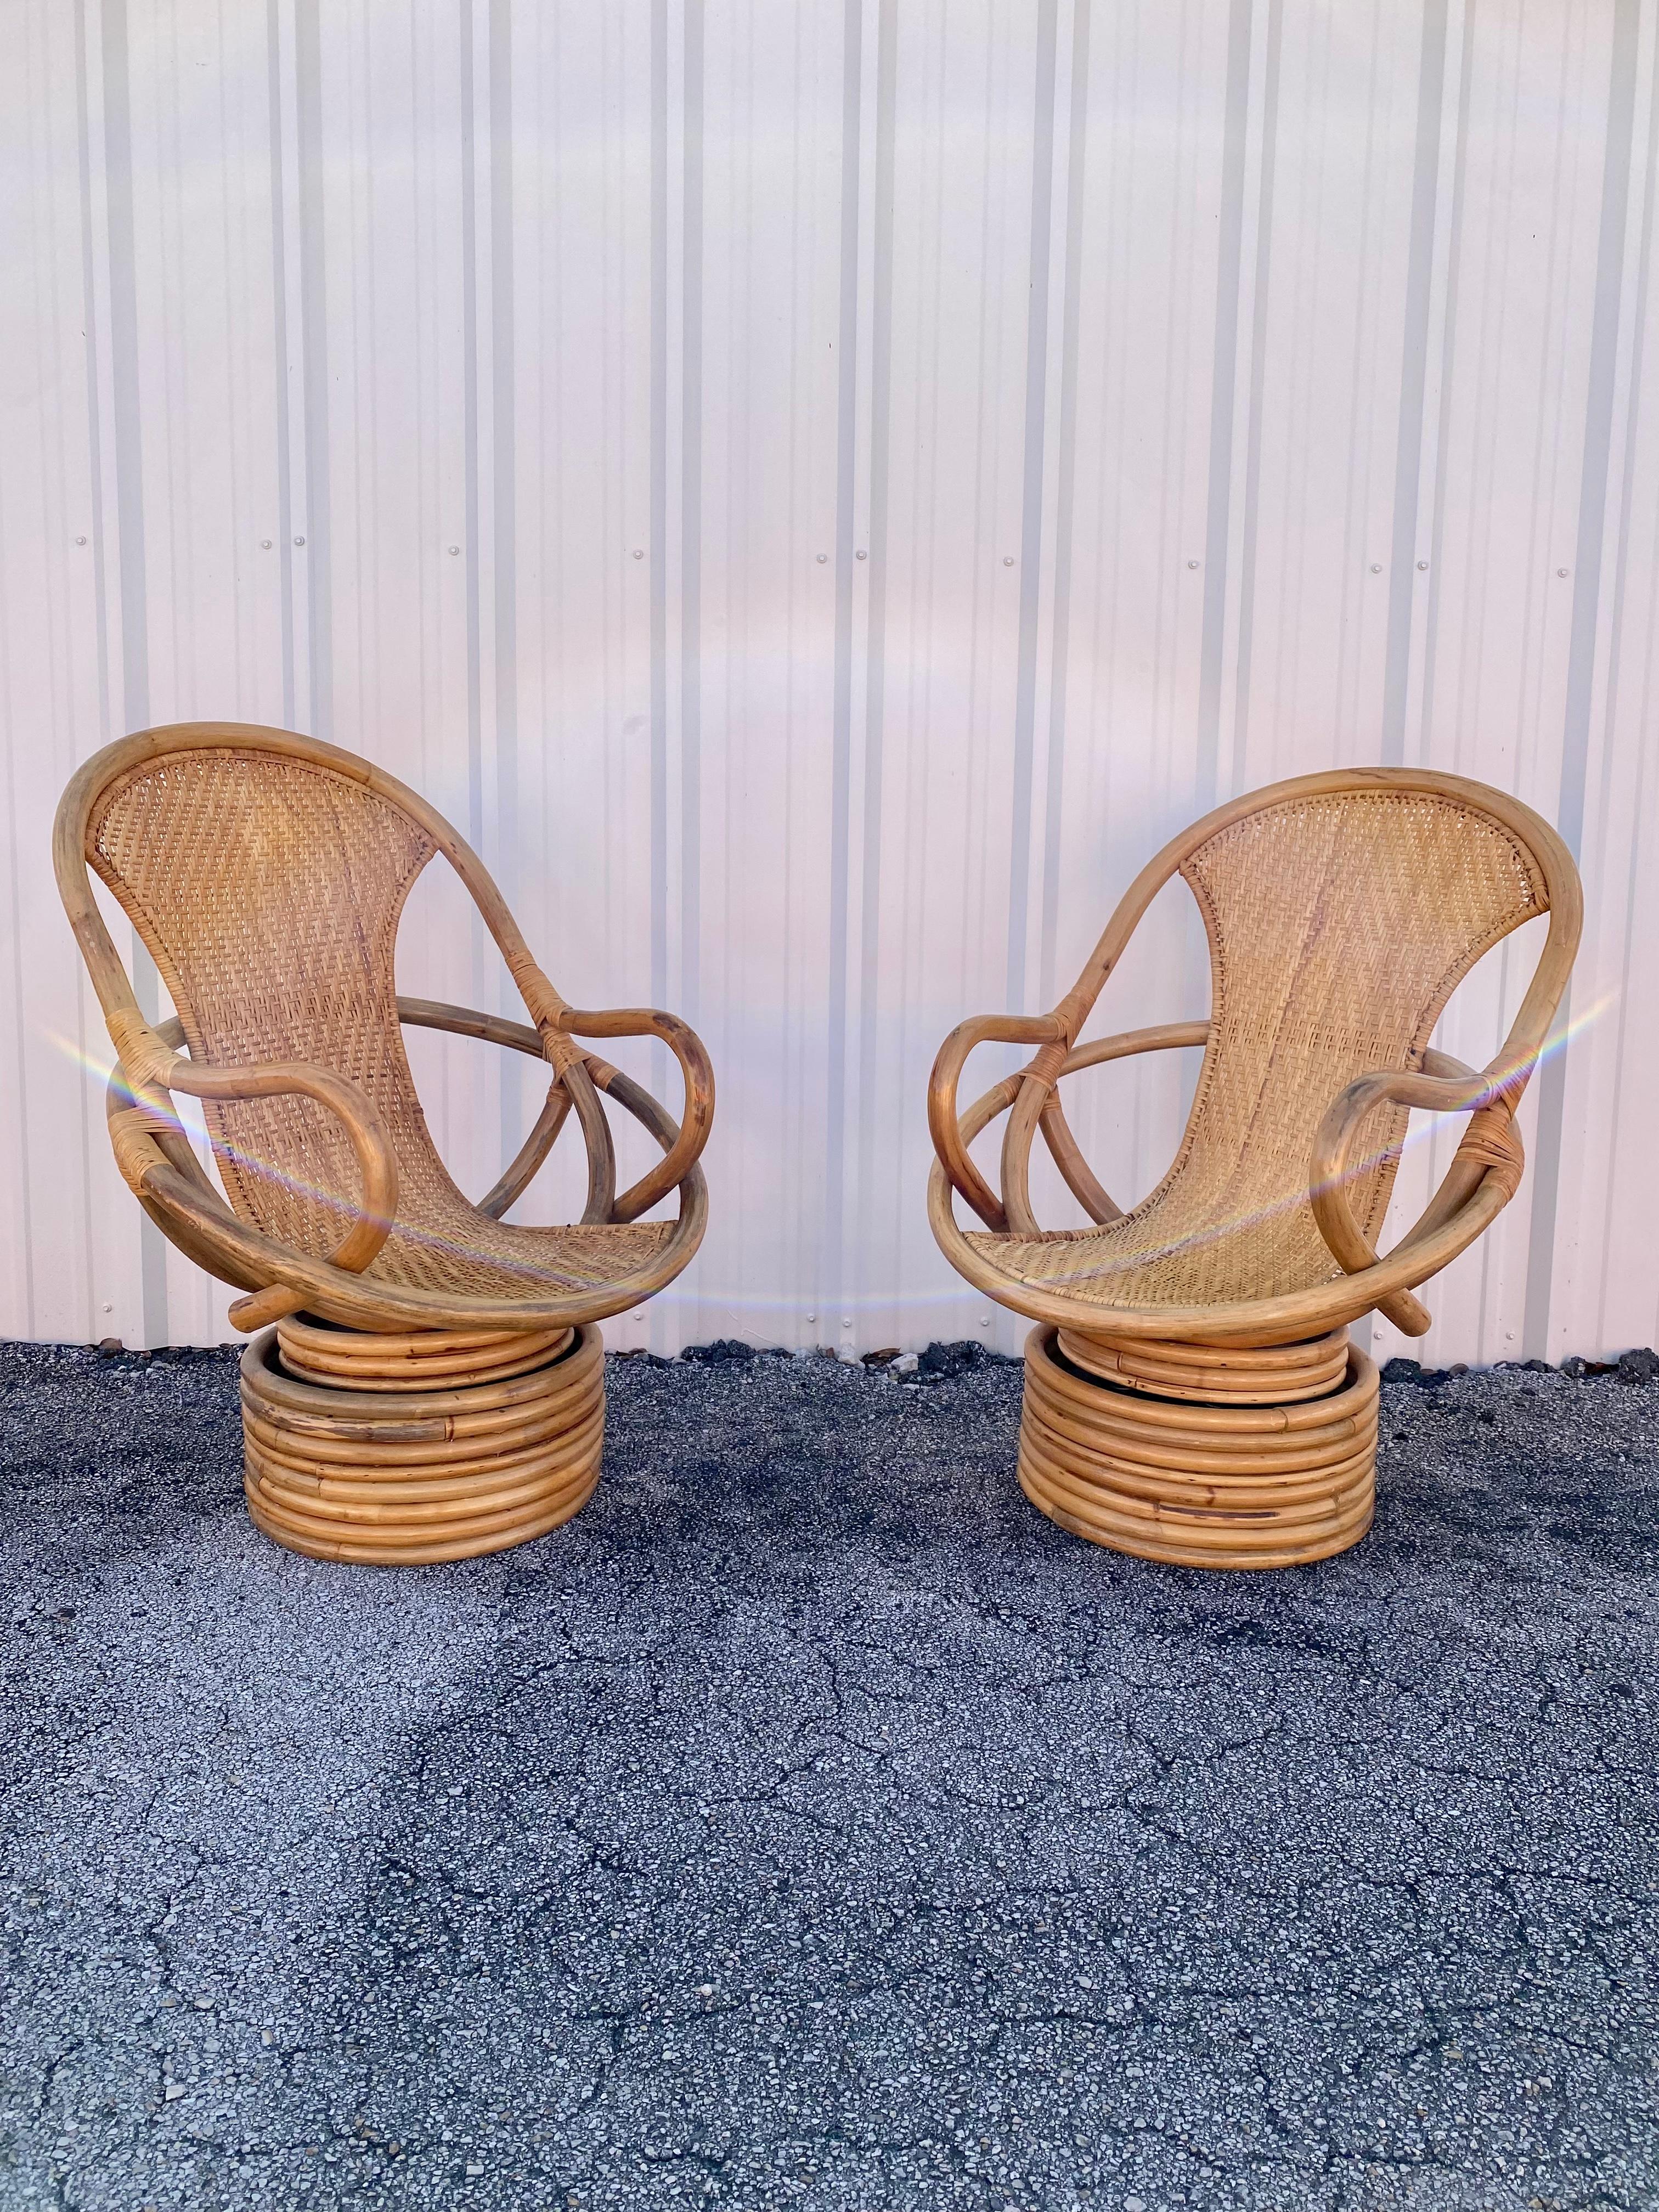 Late 20th Century 1980s Rattan Coastal Sculptural Swivel Chairs, set of 2 For Sale